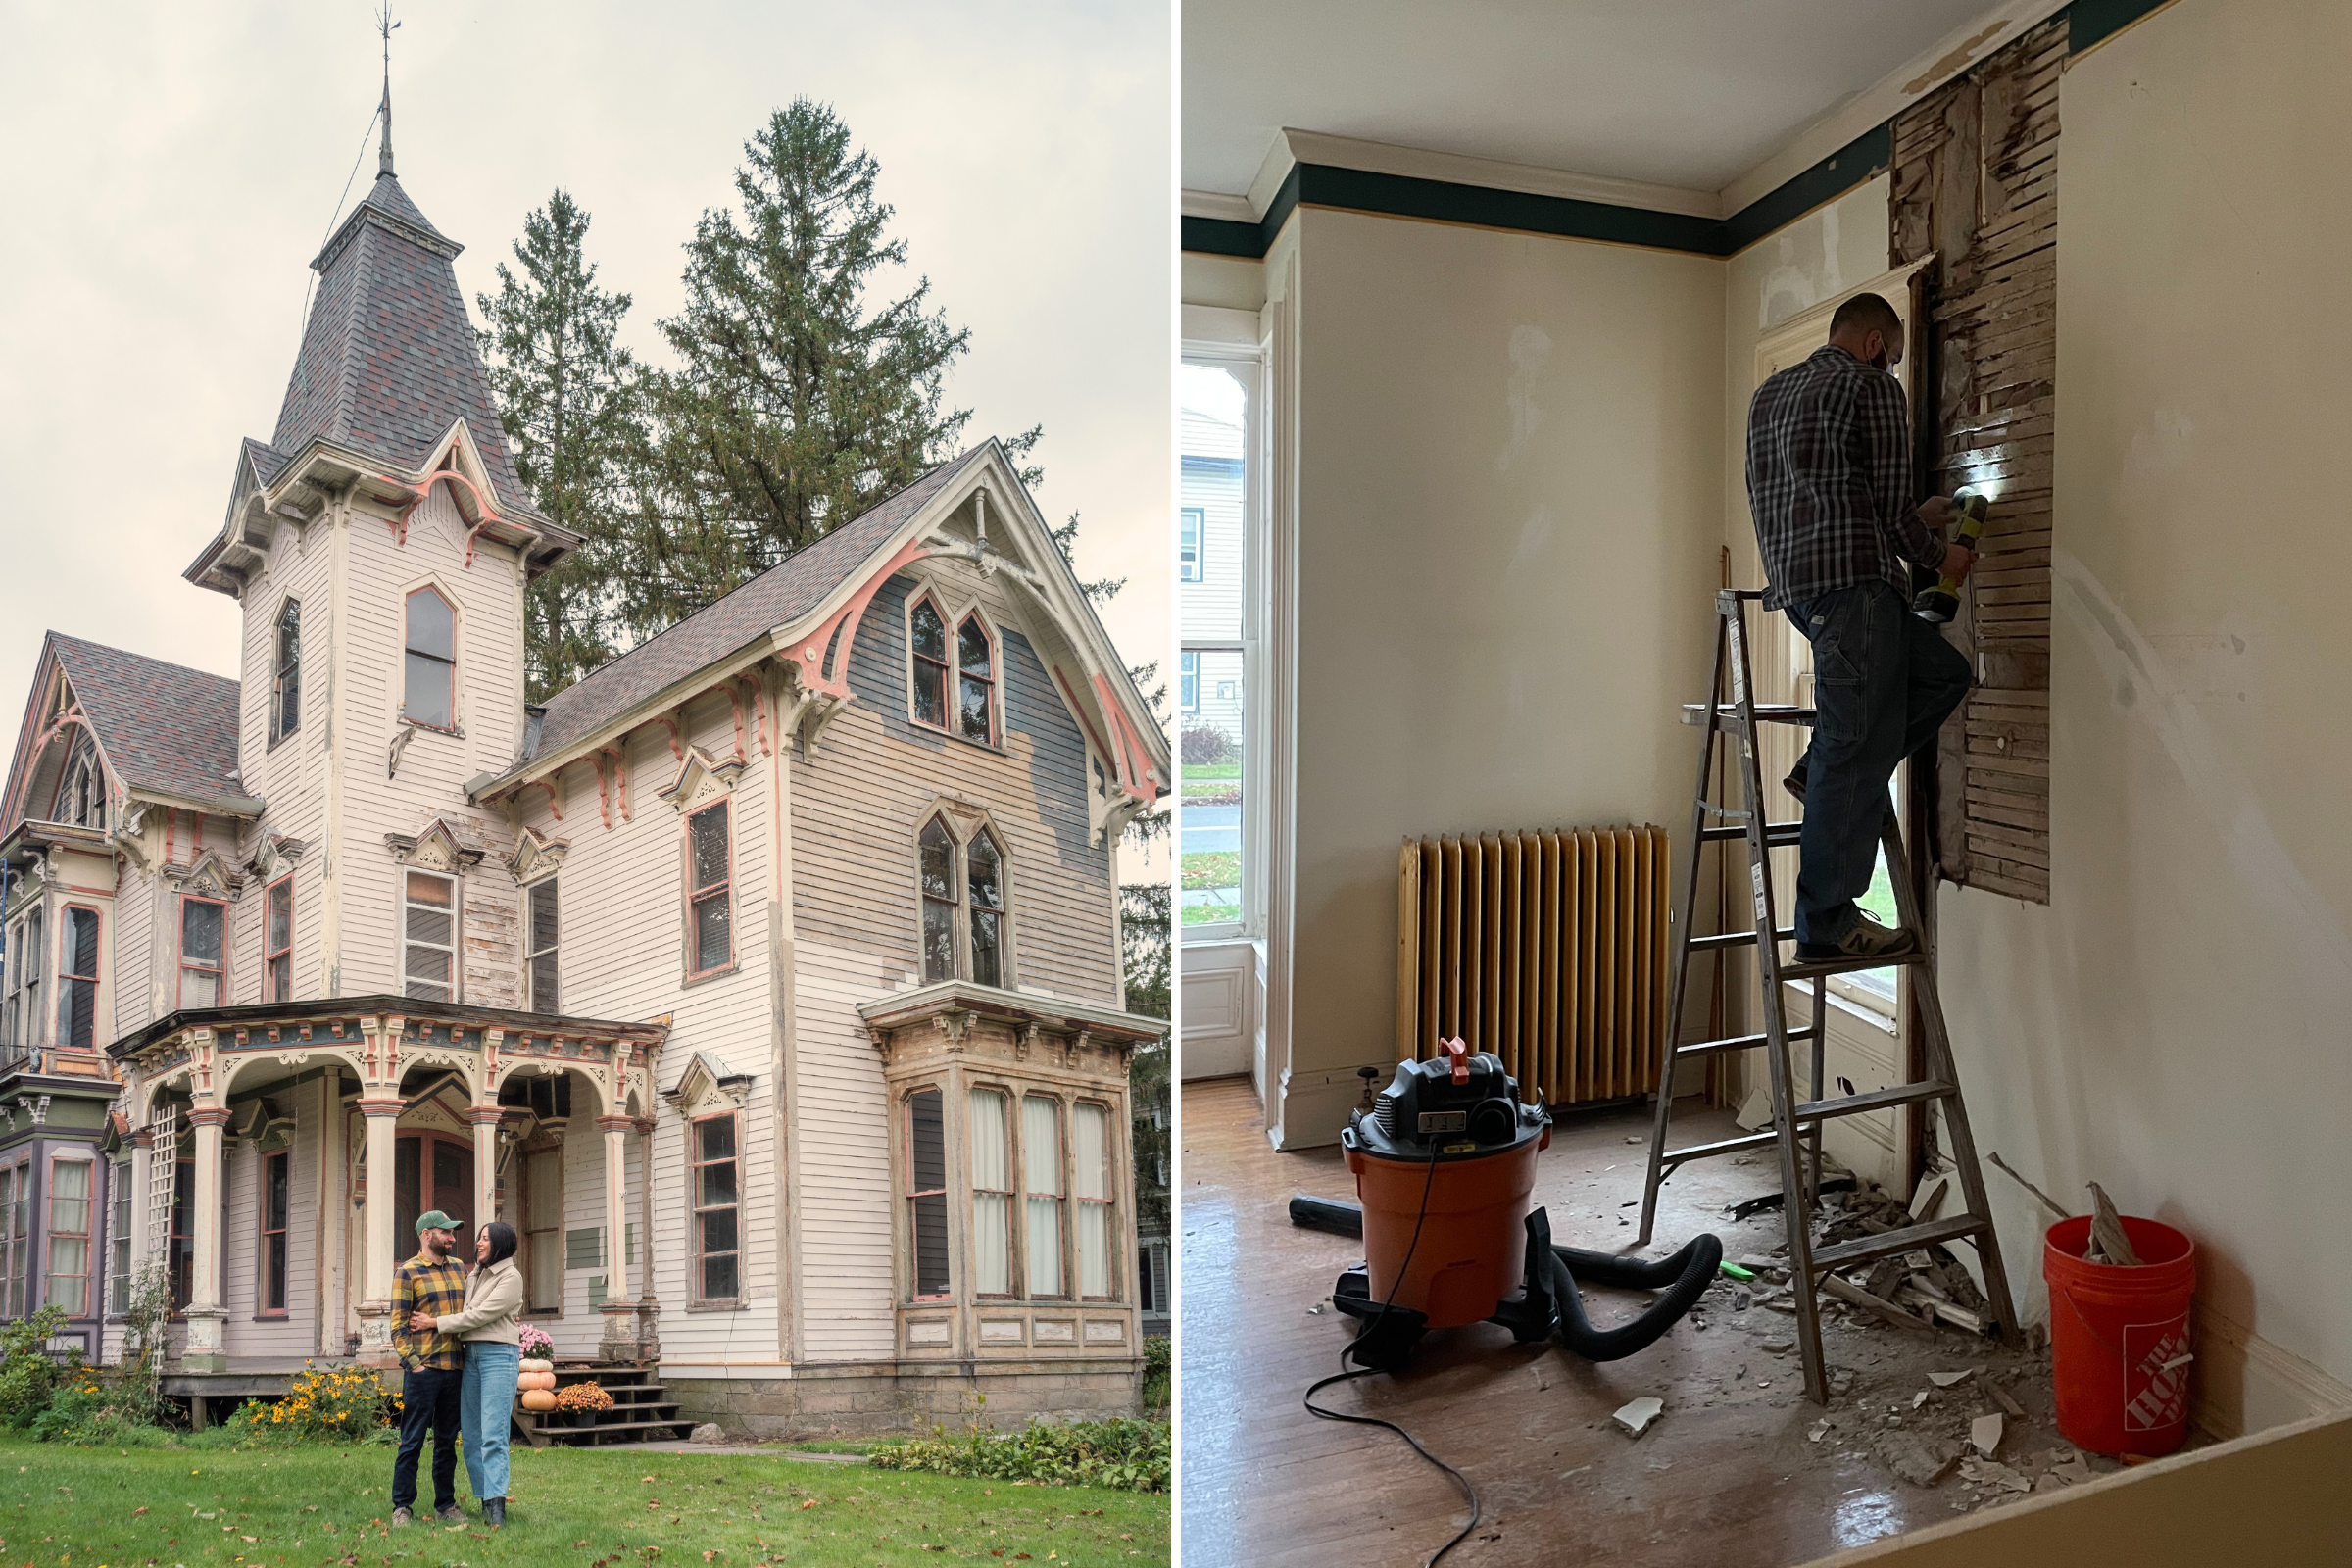 Couple buys run down 19th century Gothic house, transform into dream home